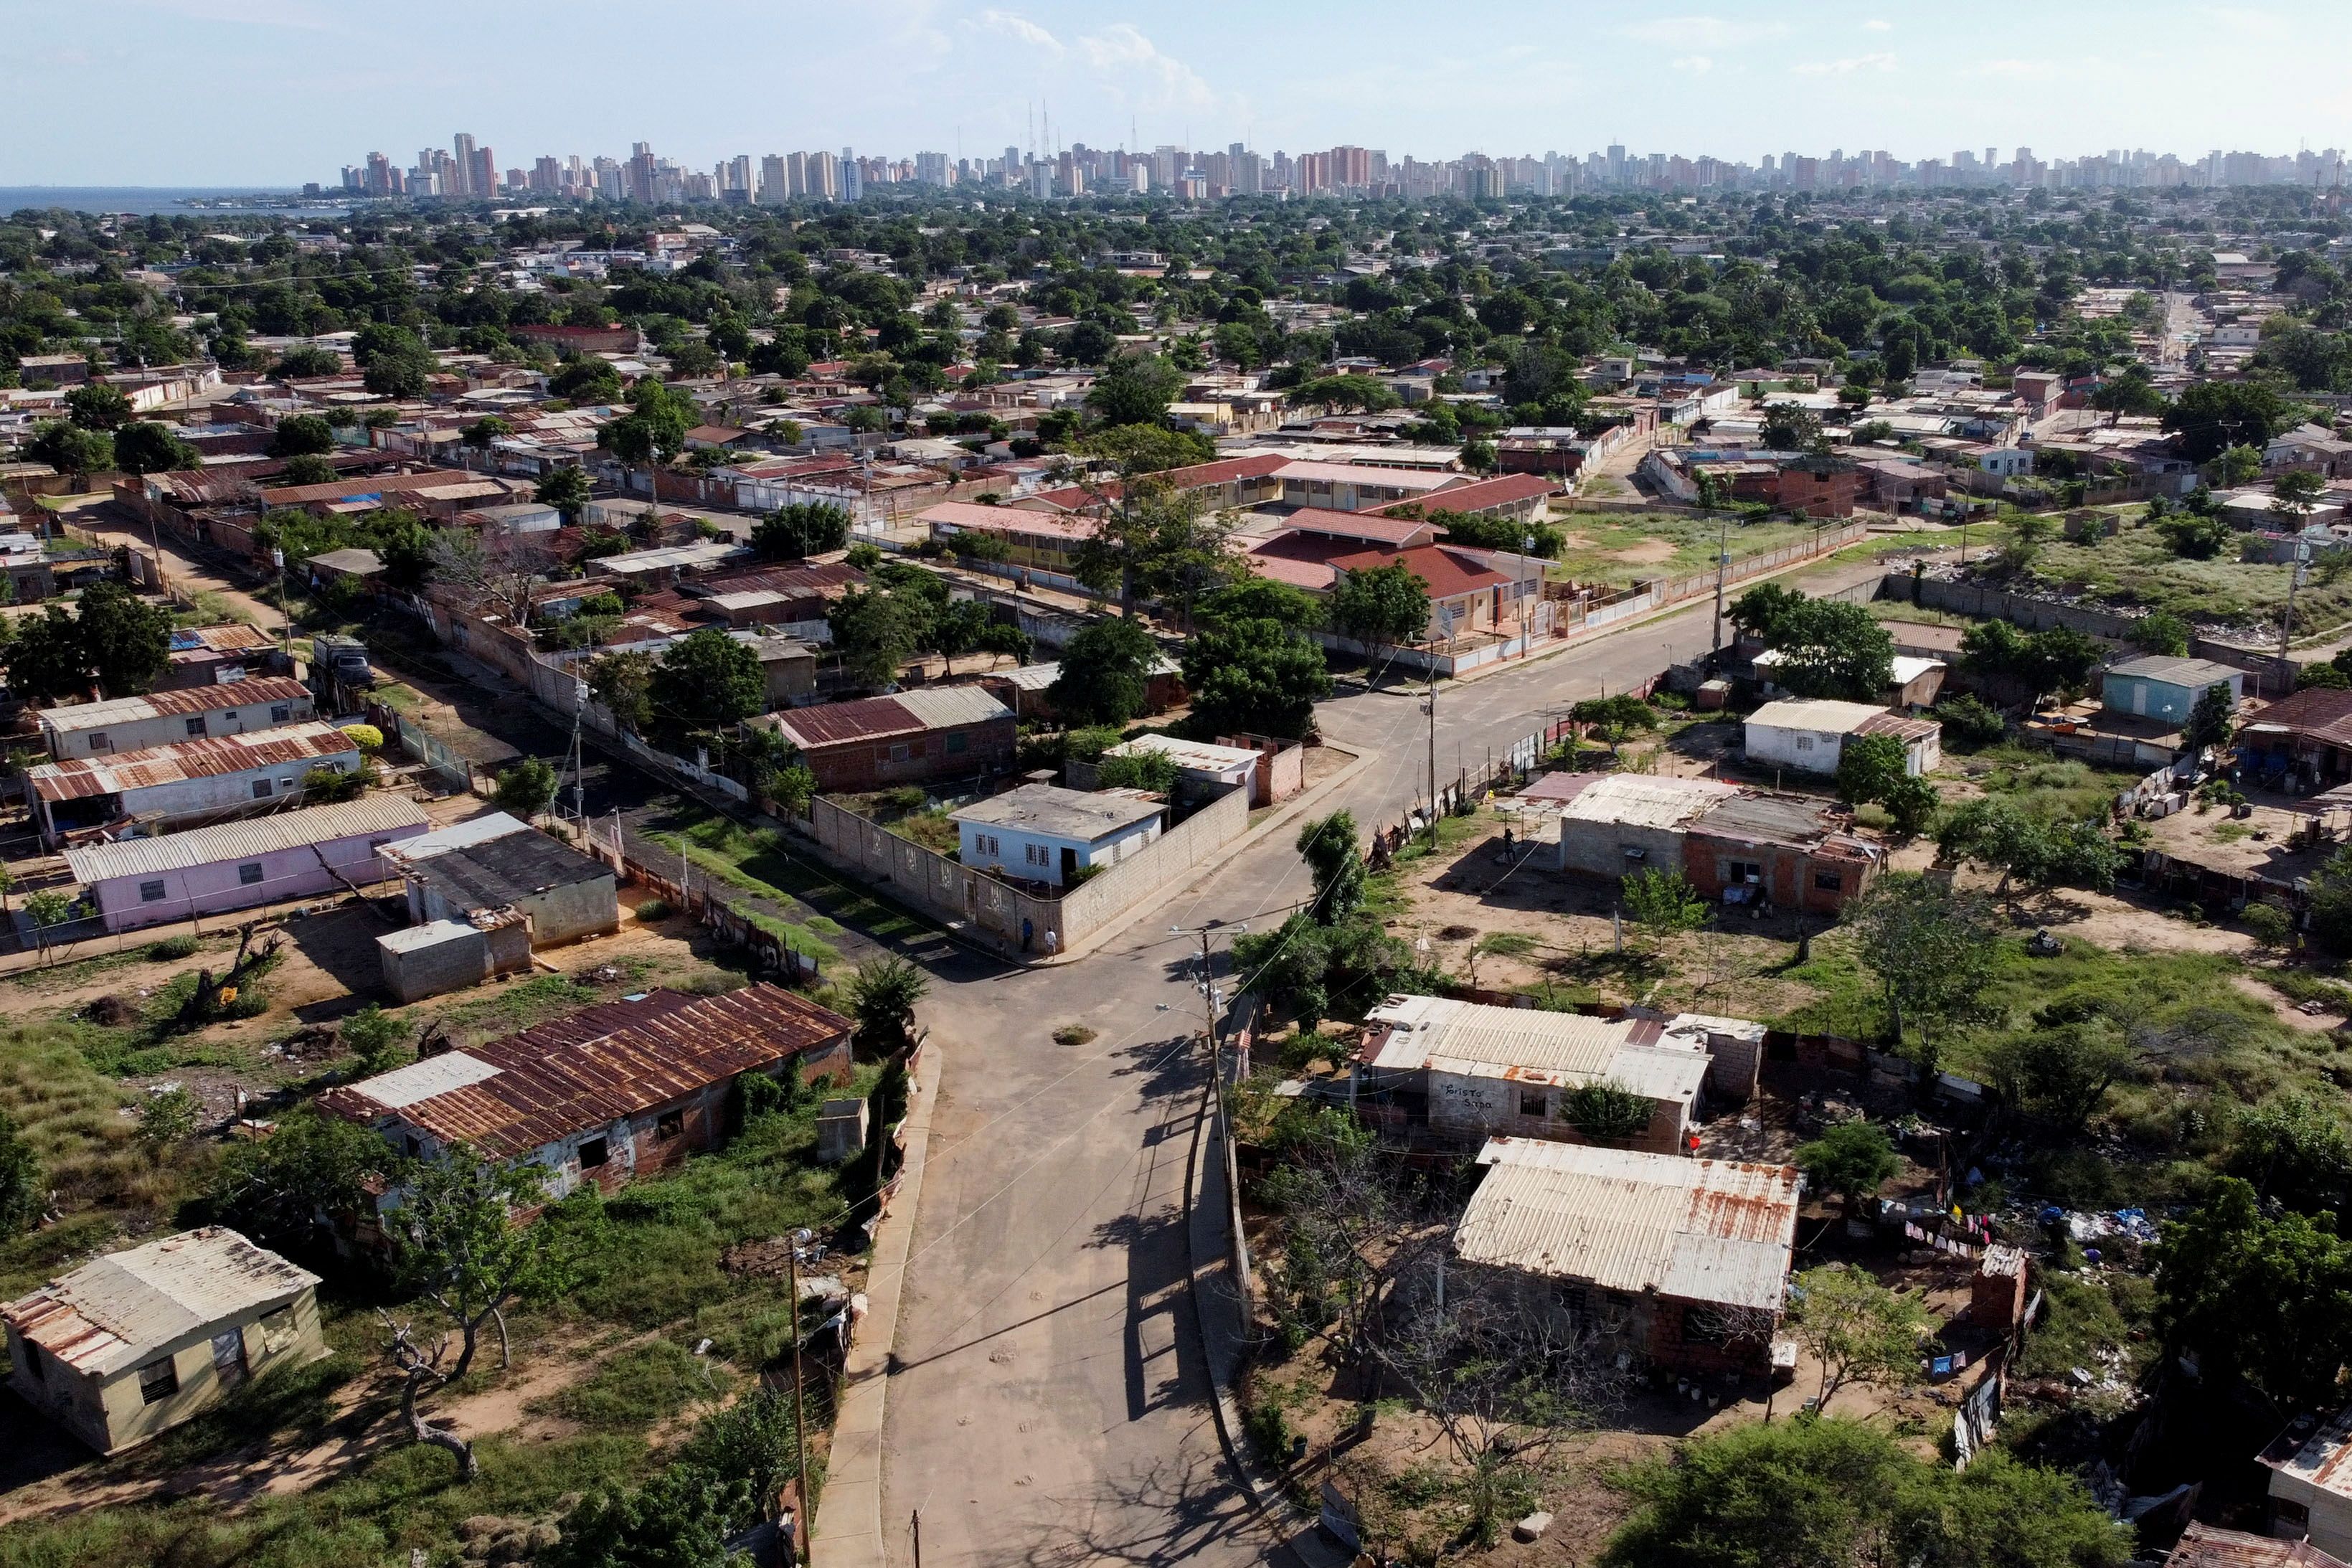 General view of the Altos de Milagro Norte neighborhood, where the Amaya family buried a family member in their backyard after they could not afford the services of a funeral home, in Maracaibo, Venezuela December 1, 2021. Picture taken December 1, 2021. REUTERS/Leonardo Fernandez Viloria